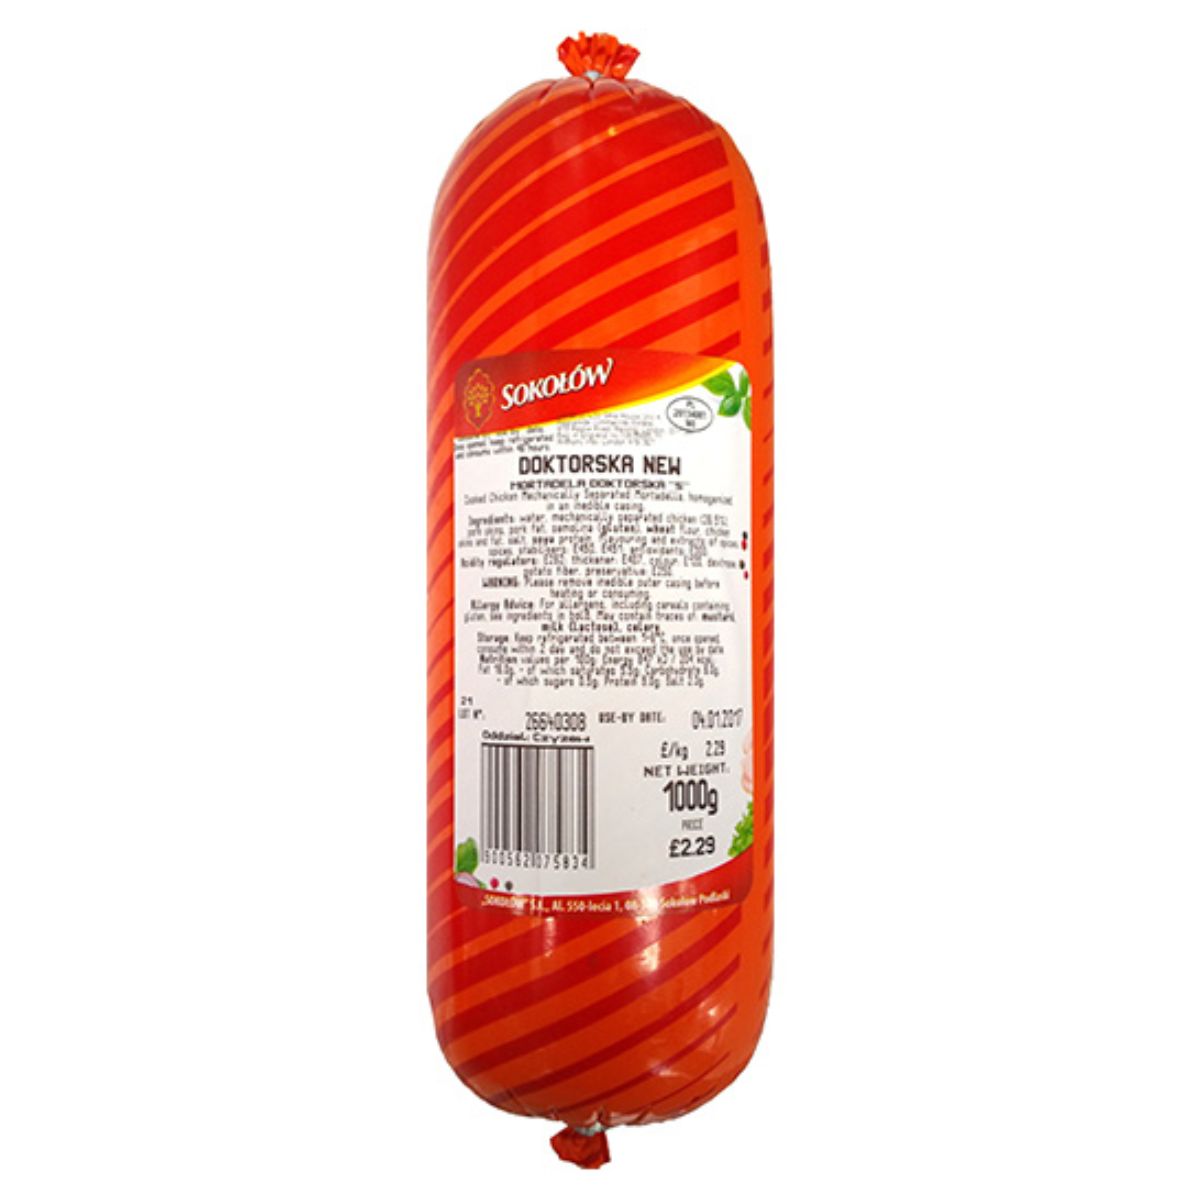 A package of Sokolow - Doktorska Sausage - 1kg on a white background.